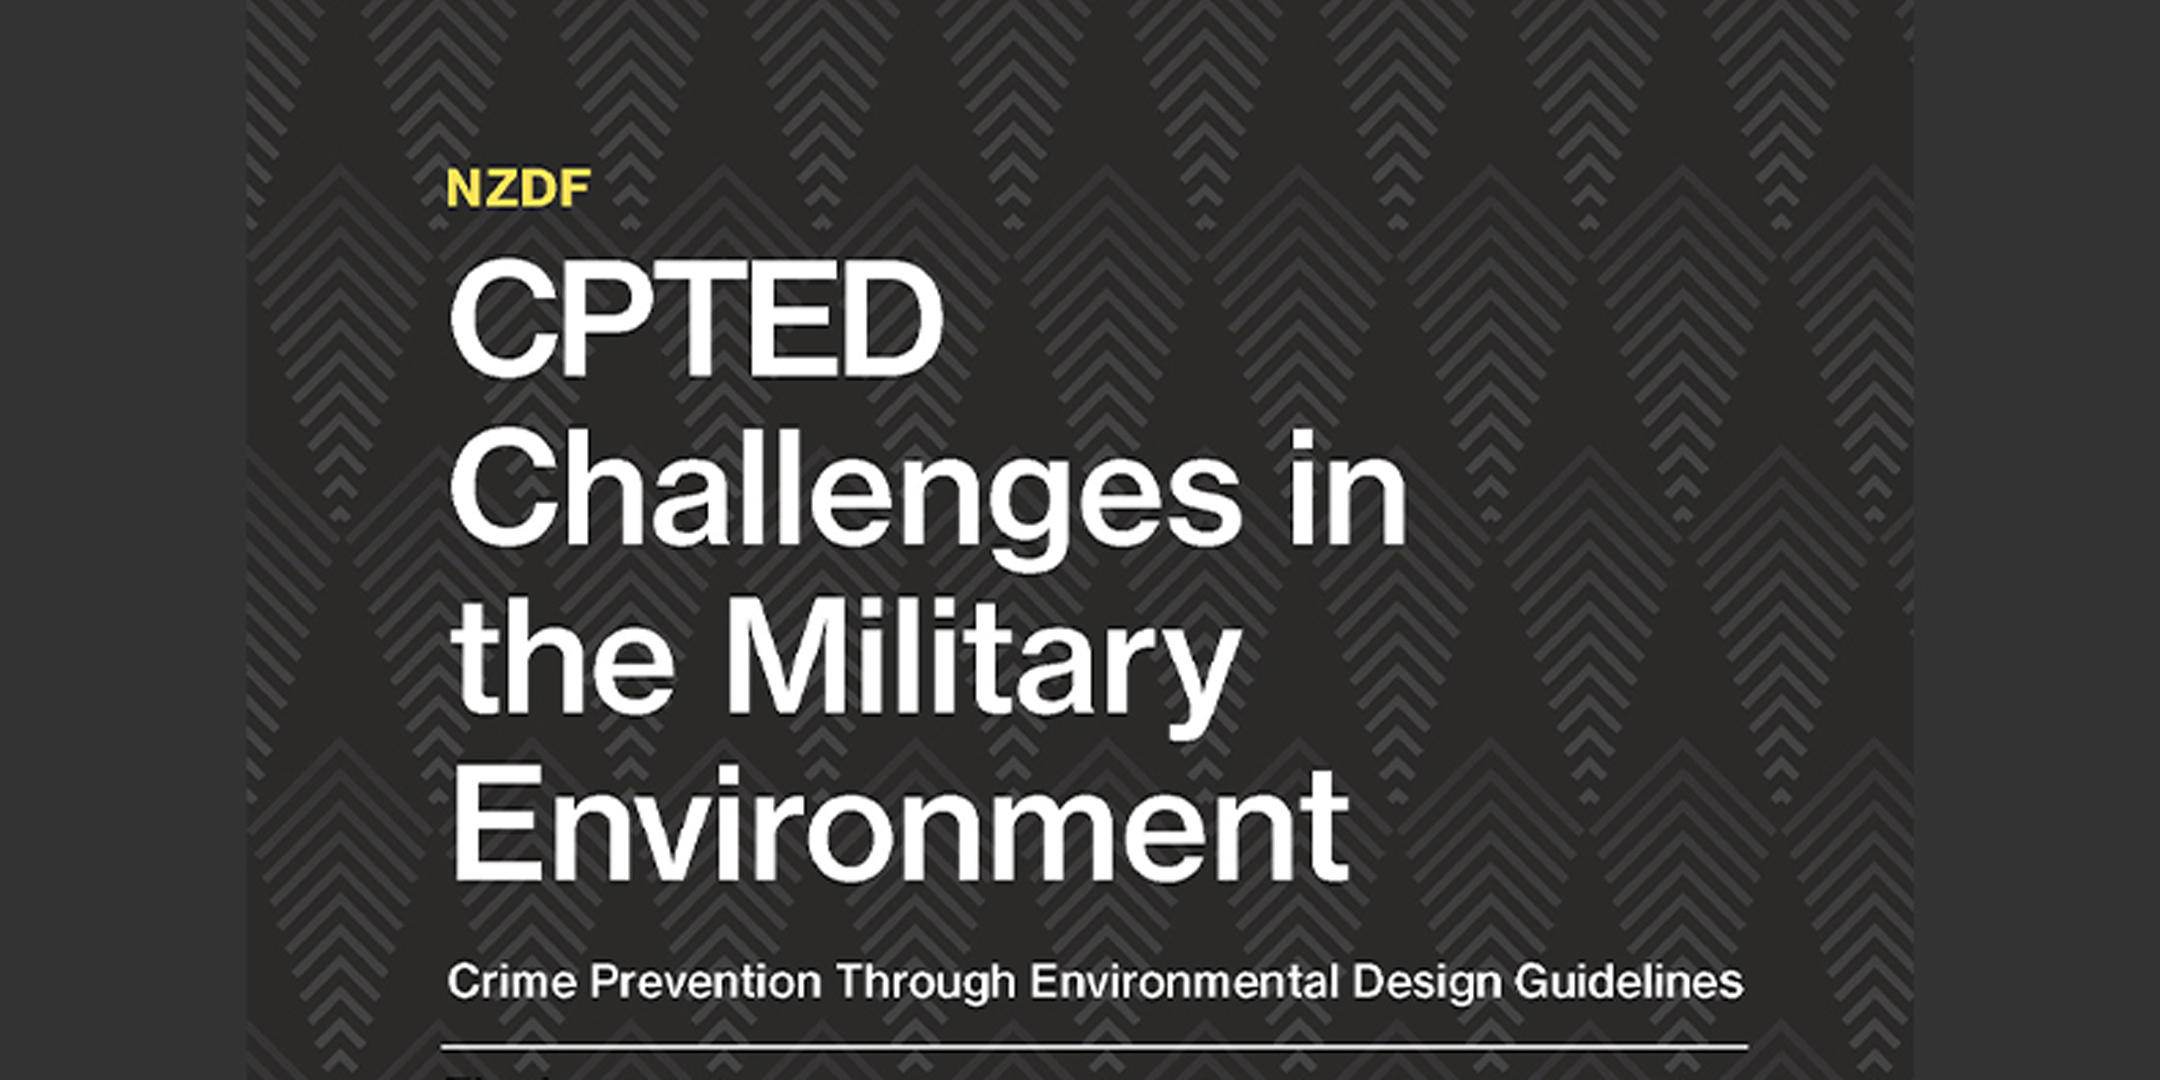 NZDF Landscape and CPTED Guidelines